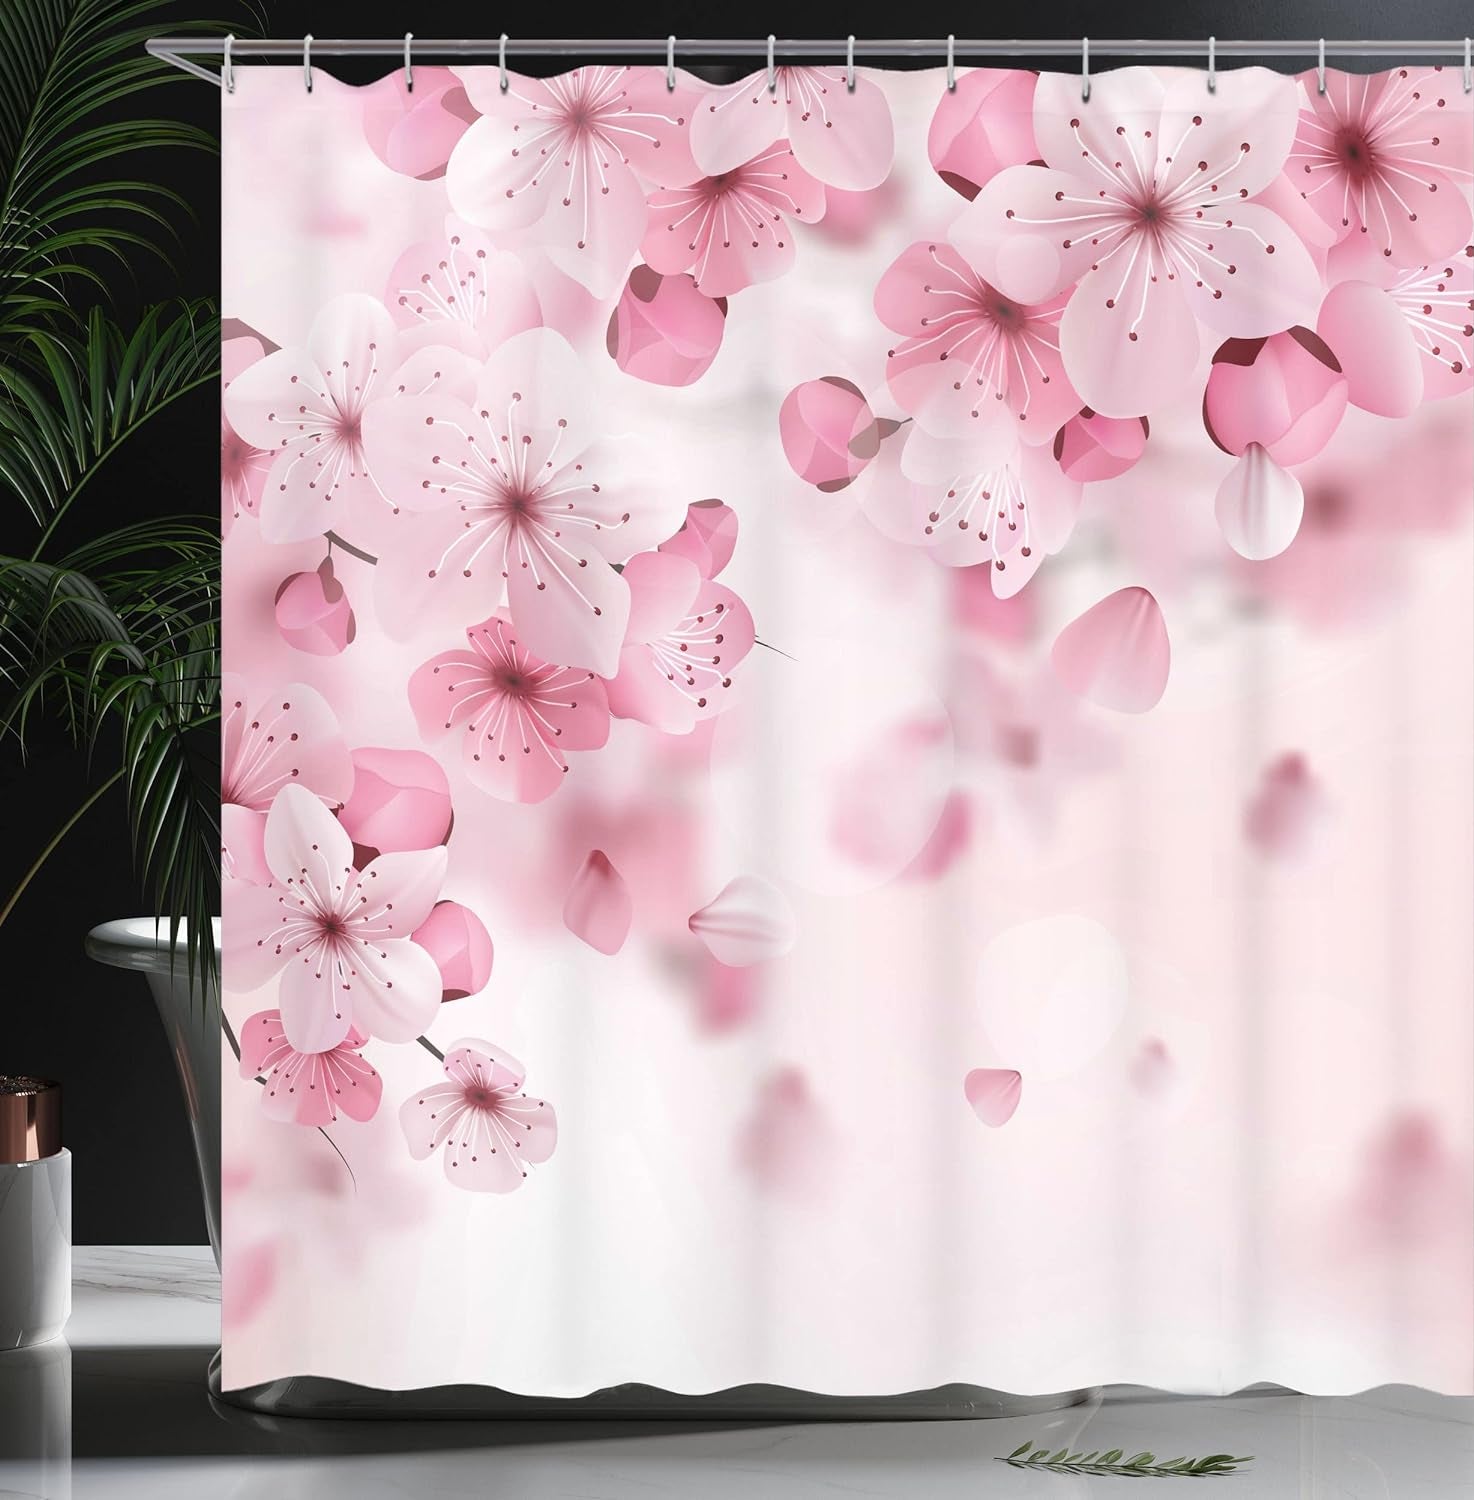 Floral Shower Curtain, Japanese Sakura Flowers with Hooks, 69" W X 70" L, Pale Pink Pale Pink